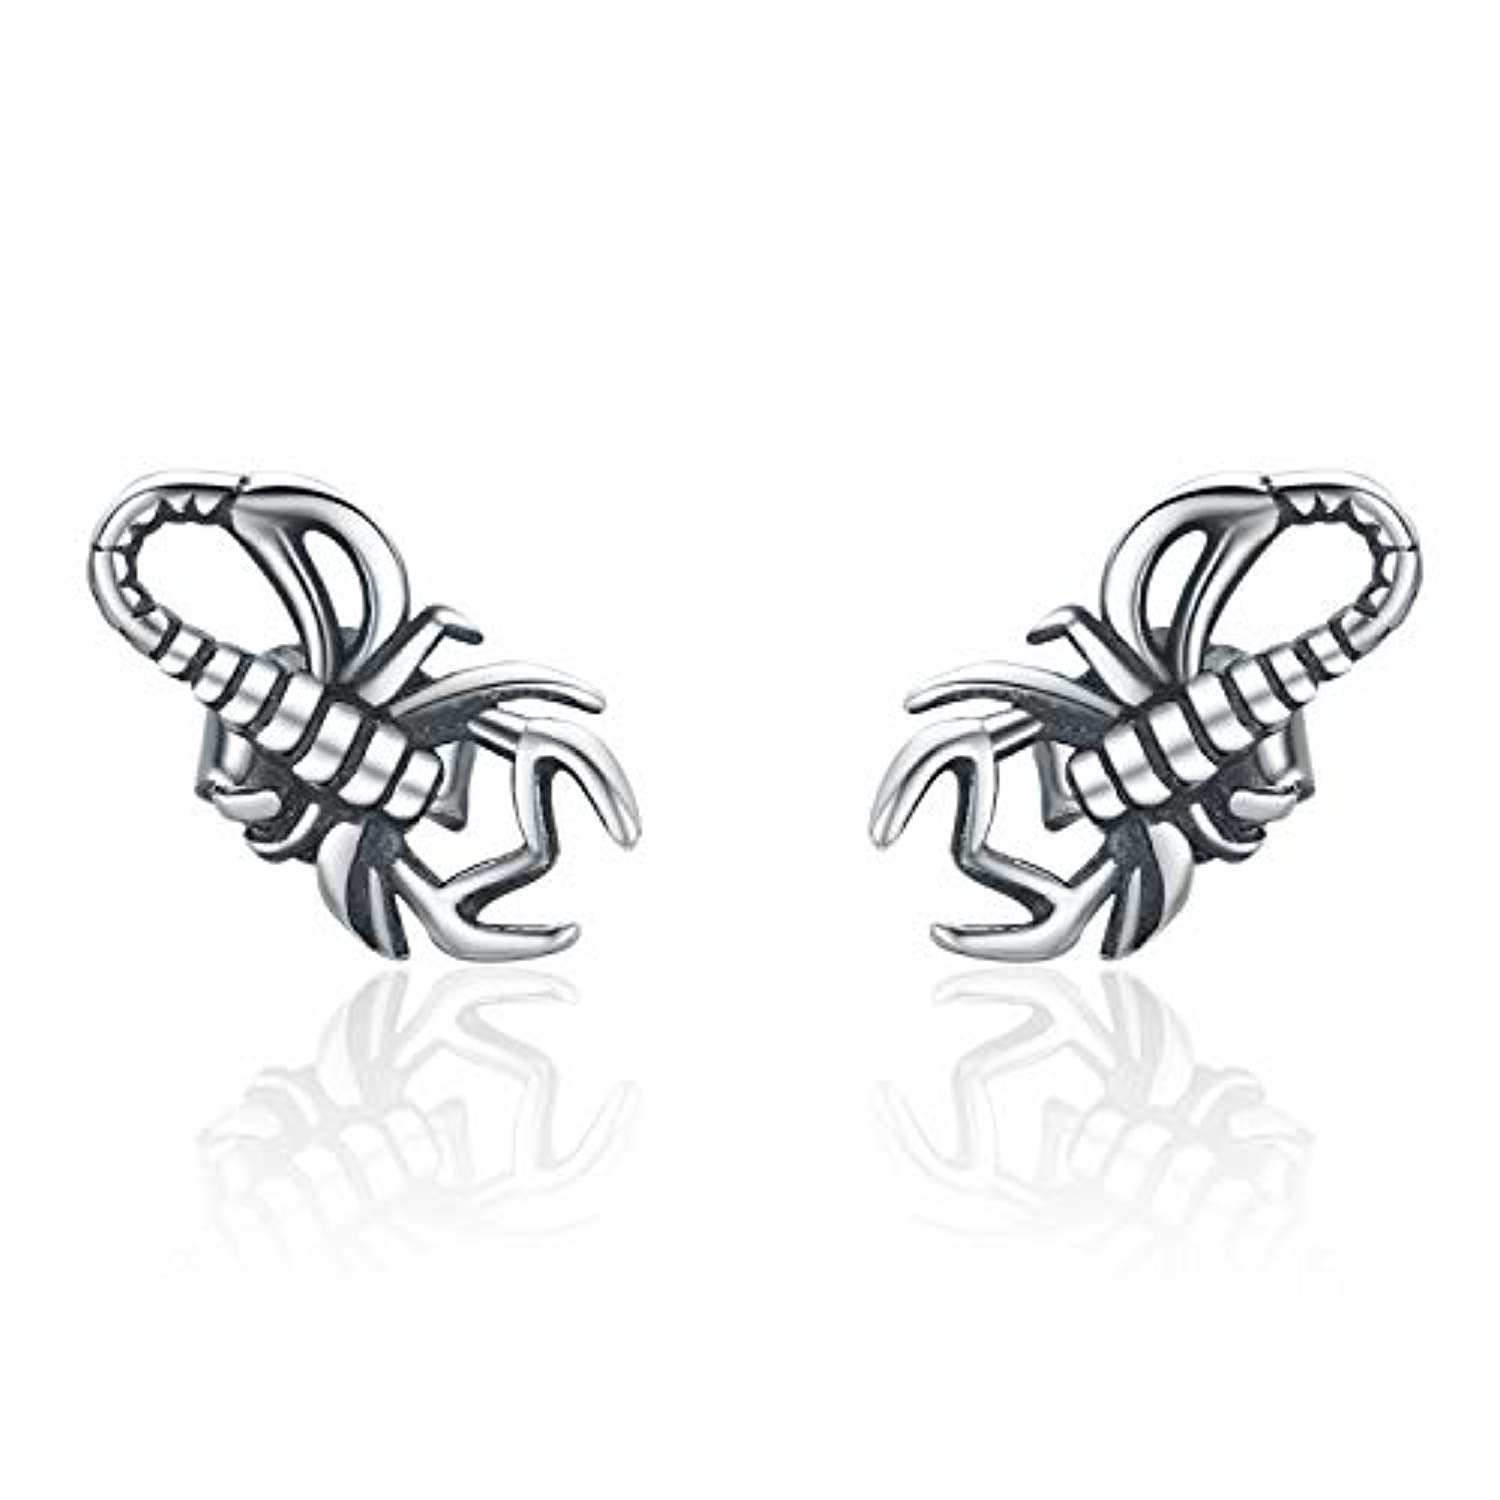 55 Mens Stud Earrings to Emphasize Your Masculinity – Innovato Design